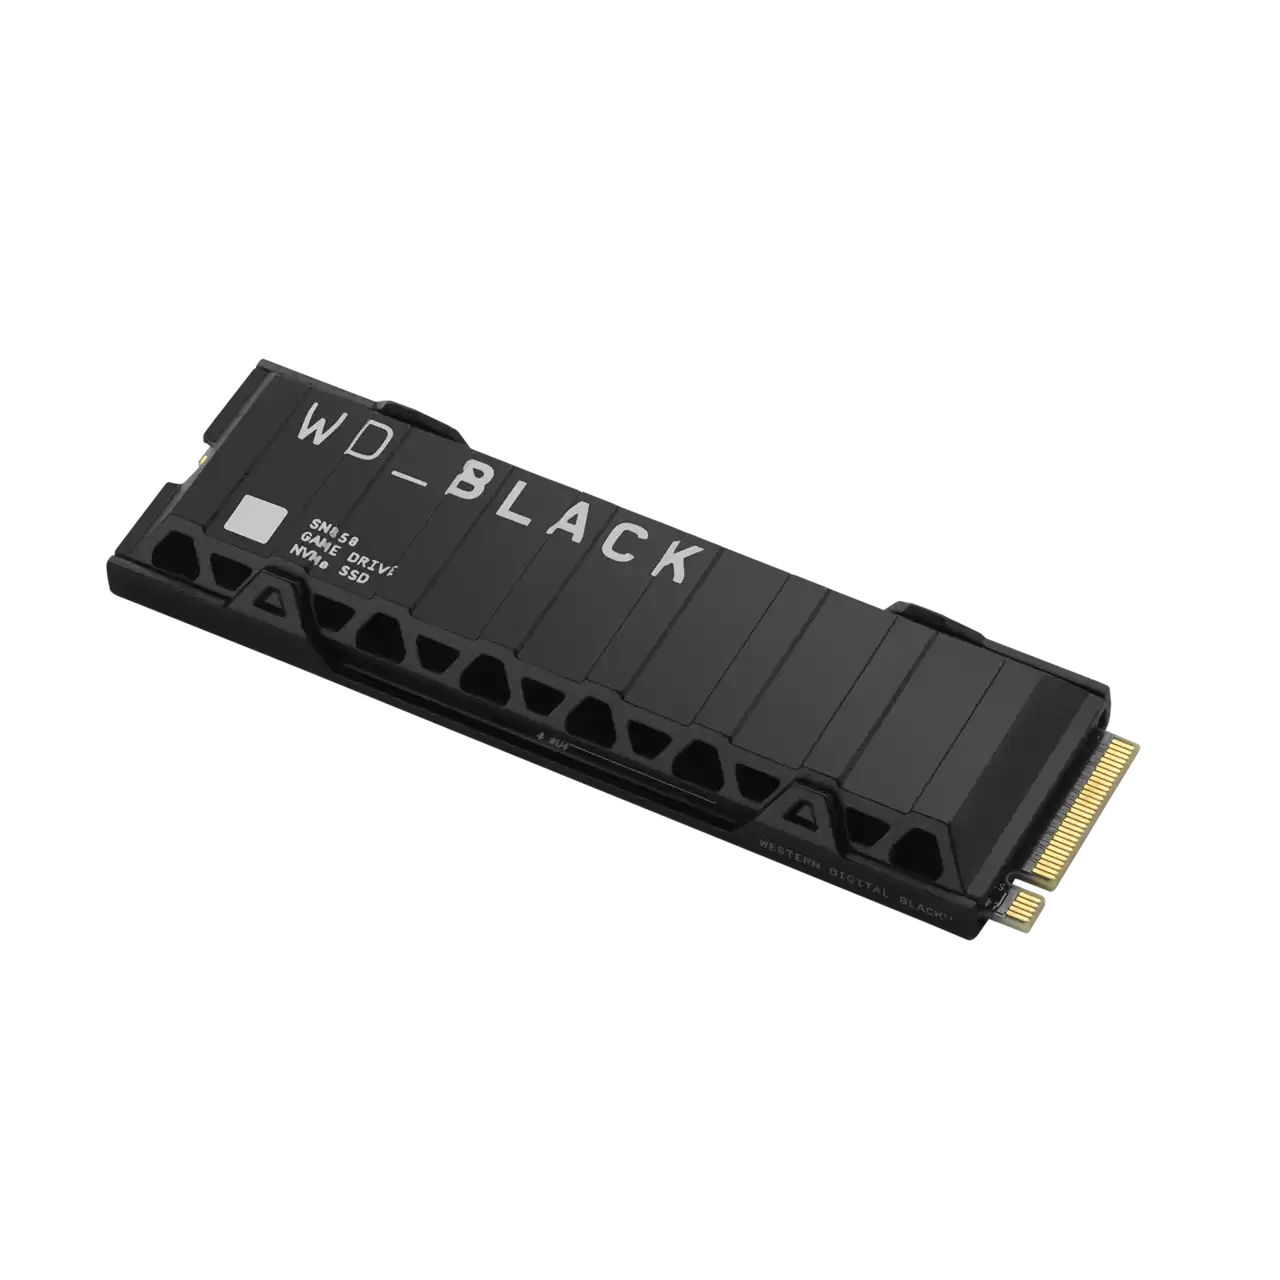 WD_BLACK 2TB SN850 NVMe SSD, Internal M.2 2280 Solid State Drive with Heatsink - WDS200T1XHE - image 2 of 3